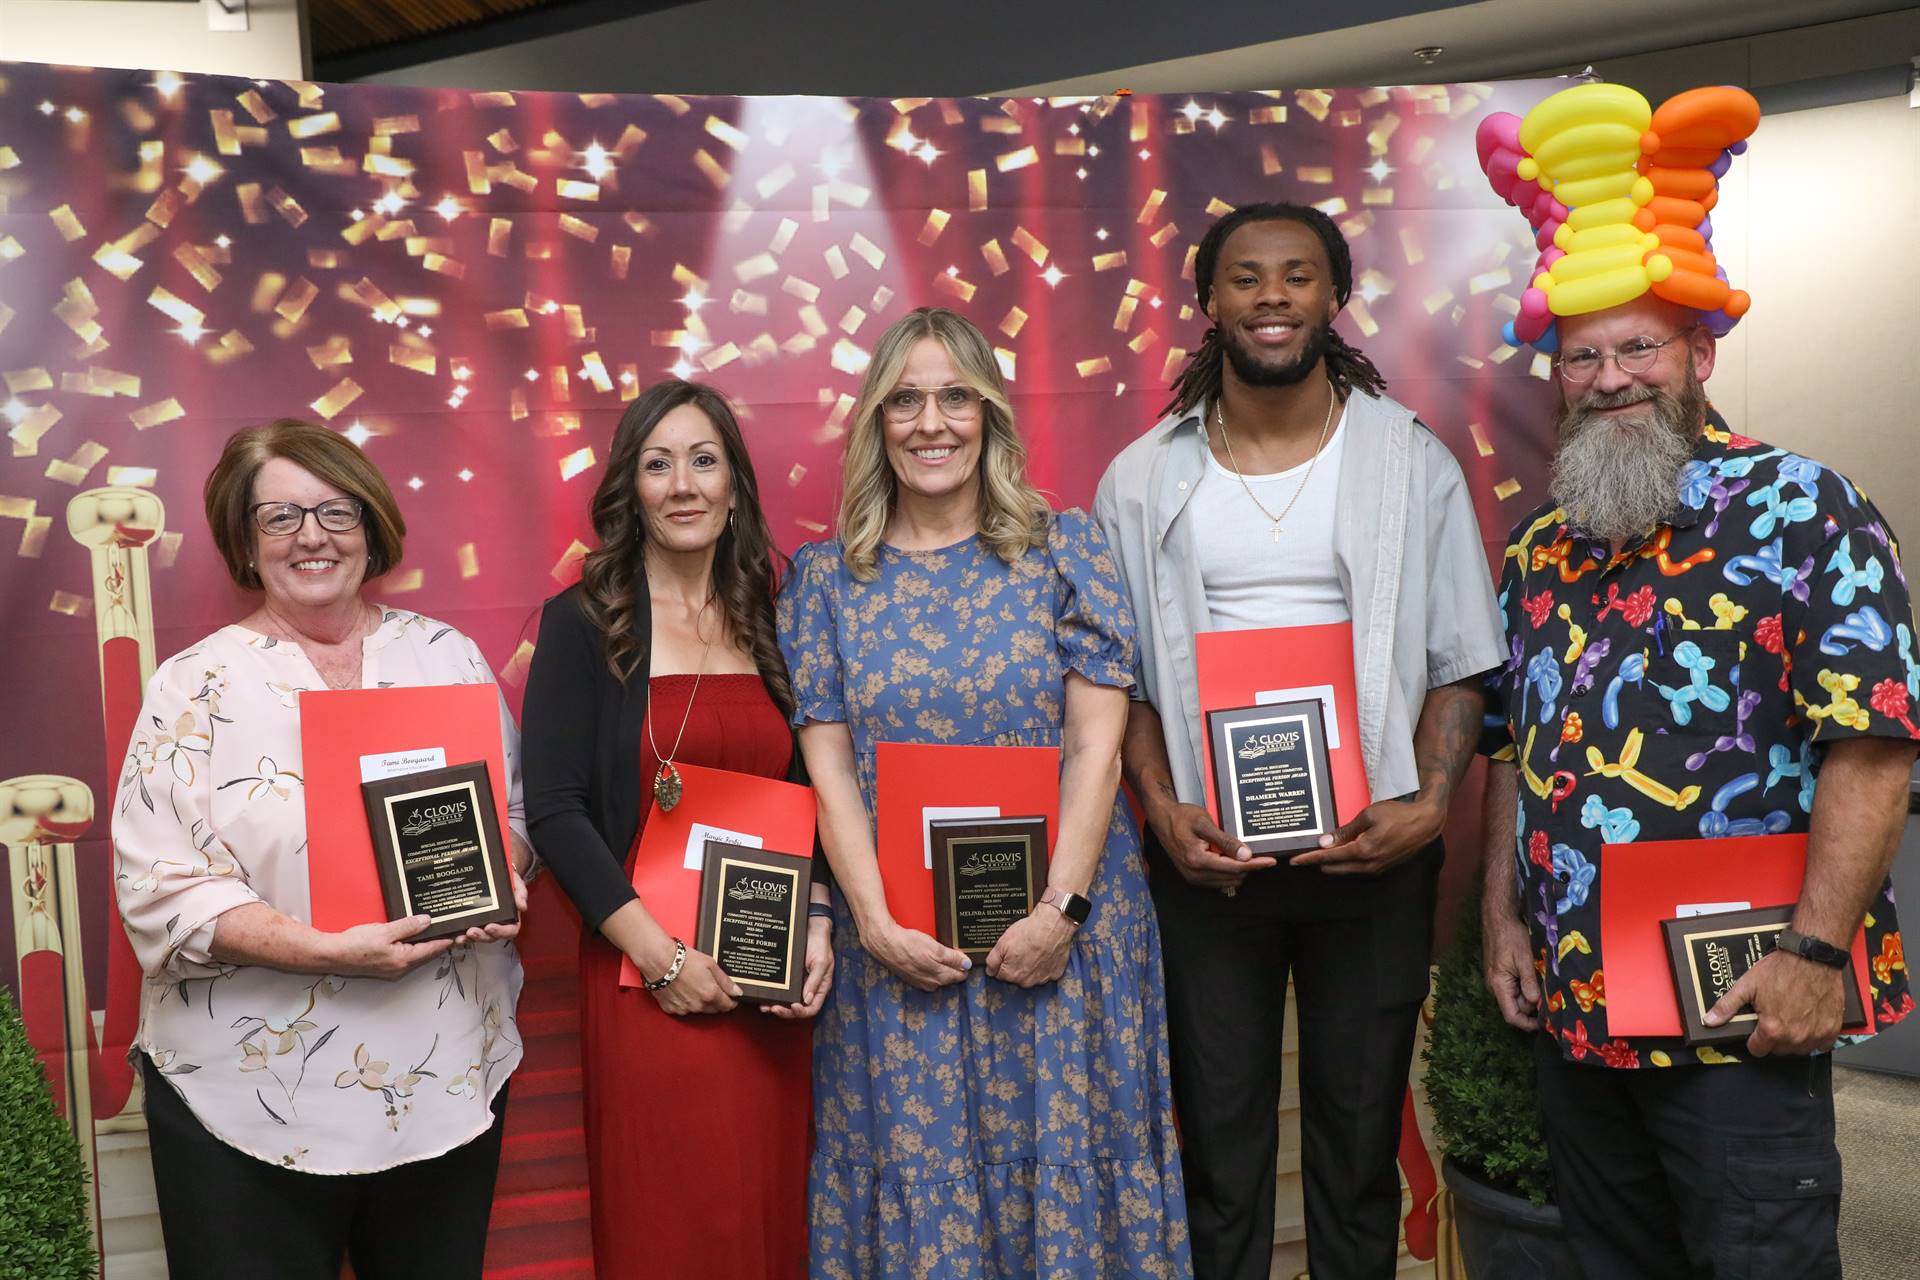 3 Women and 2 men smiling with their awards. One man is wearing a funny balloon hat.